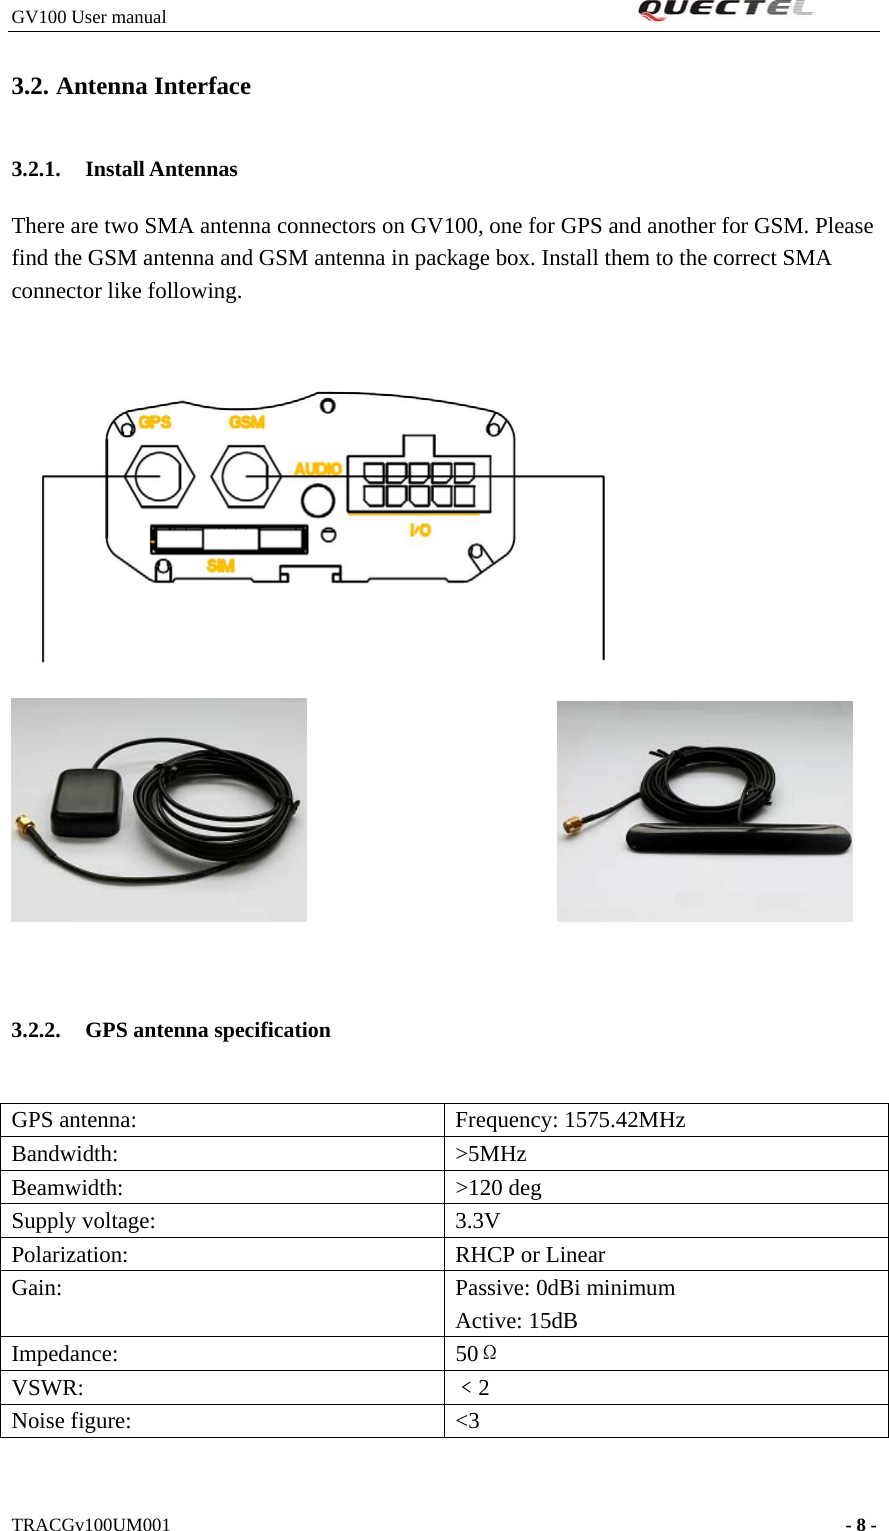 GV100 User manual                                                              3.2. Antenna Interface 3.2.1. Install Antennas   There are two SMA antenna connectors on GV100, one for GPS and another for GSM. Please find the GSM antenna and GSM antenna in package box. Install them to the correct SMA connector like following.                               3.2.2. GPS antenna specification  GPS antenna:  Frequency: 1575.42MHz Bandwidth:   &gt;5MHz Beamwidth:   &gt;120 deg Supply voltage:    3.3V Polarization:    RHCP or Linear Gain:  Passive: 0dBi minimum Active: 15dB Impedance:   50Ω VSWR:   ﹤2 Noise figure:    &lt;3   TRACGv100UM001                                                                    - 8 -   